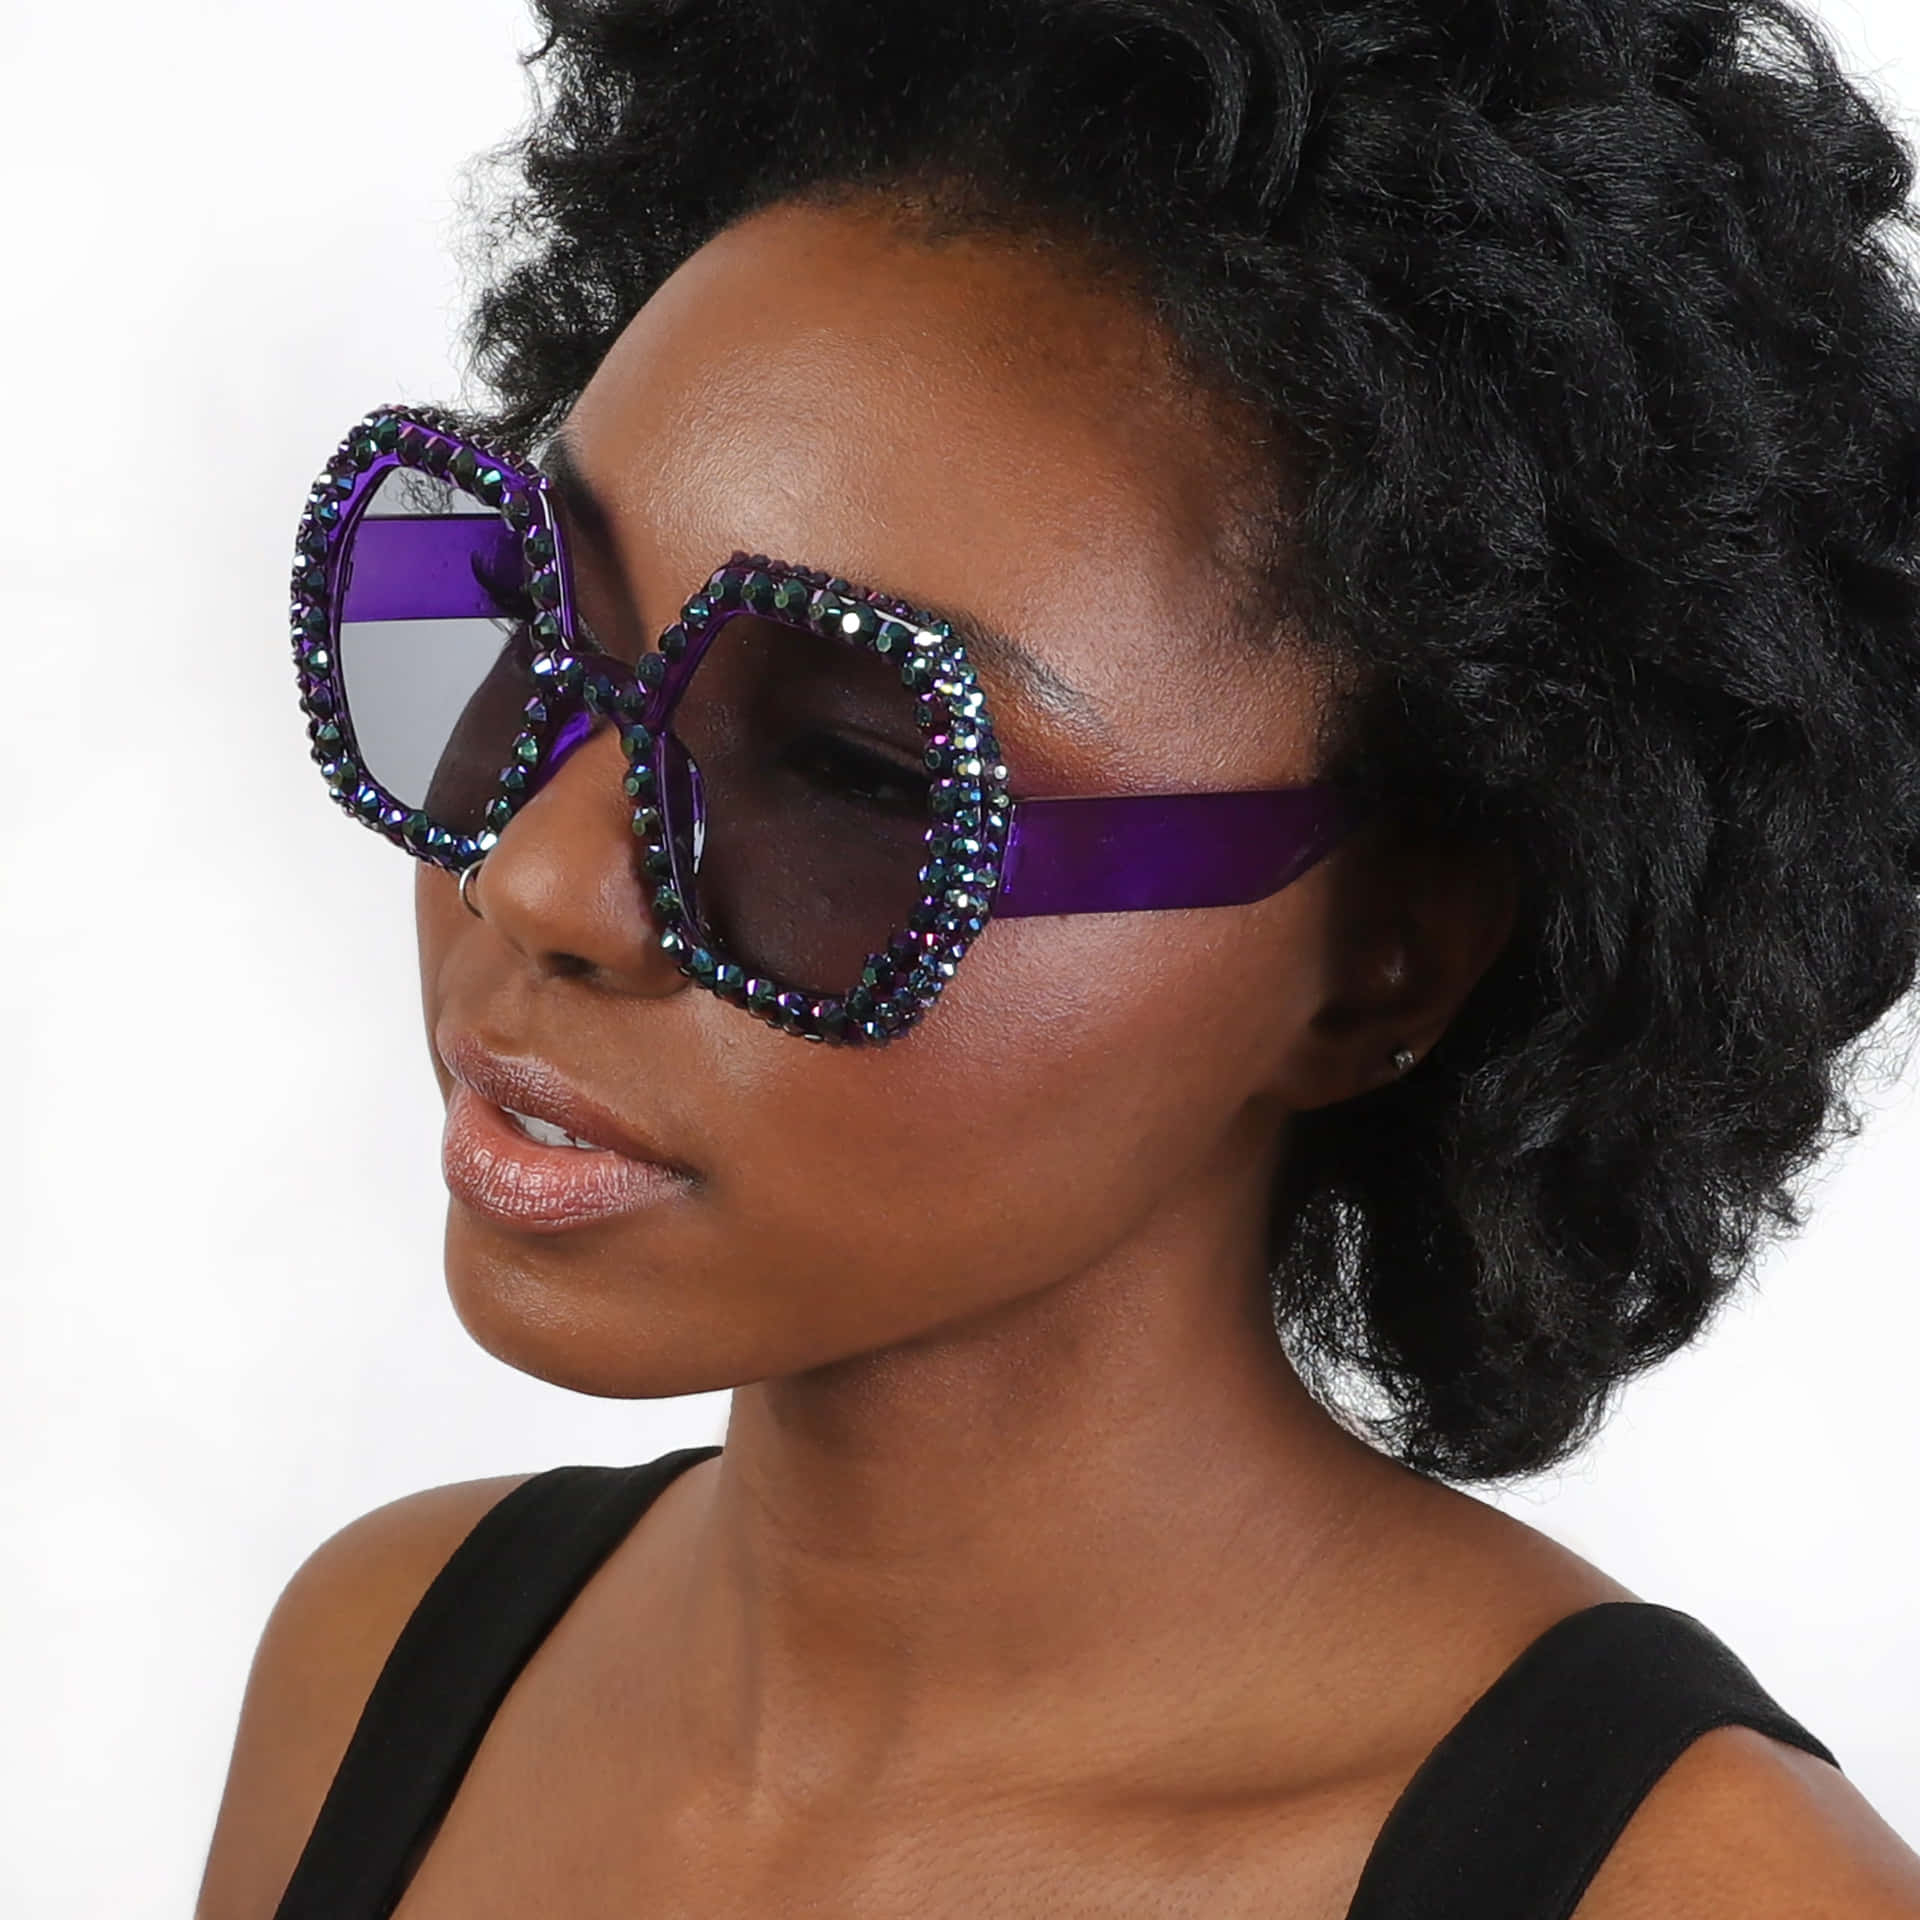 Look cool and fashionable with a pair of stylish purple sunglasses! Wallpaper